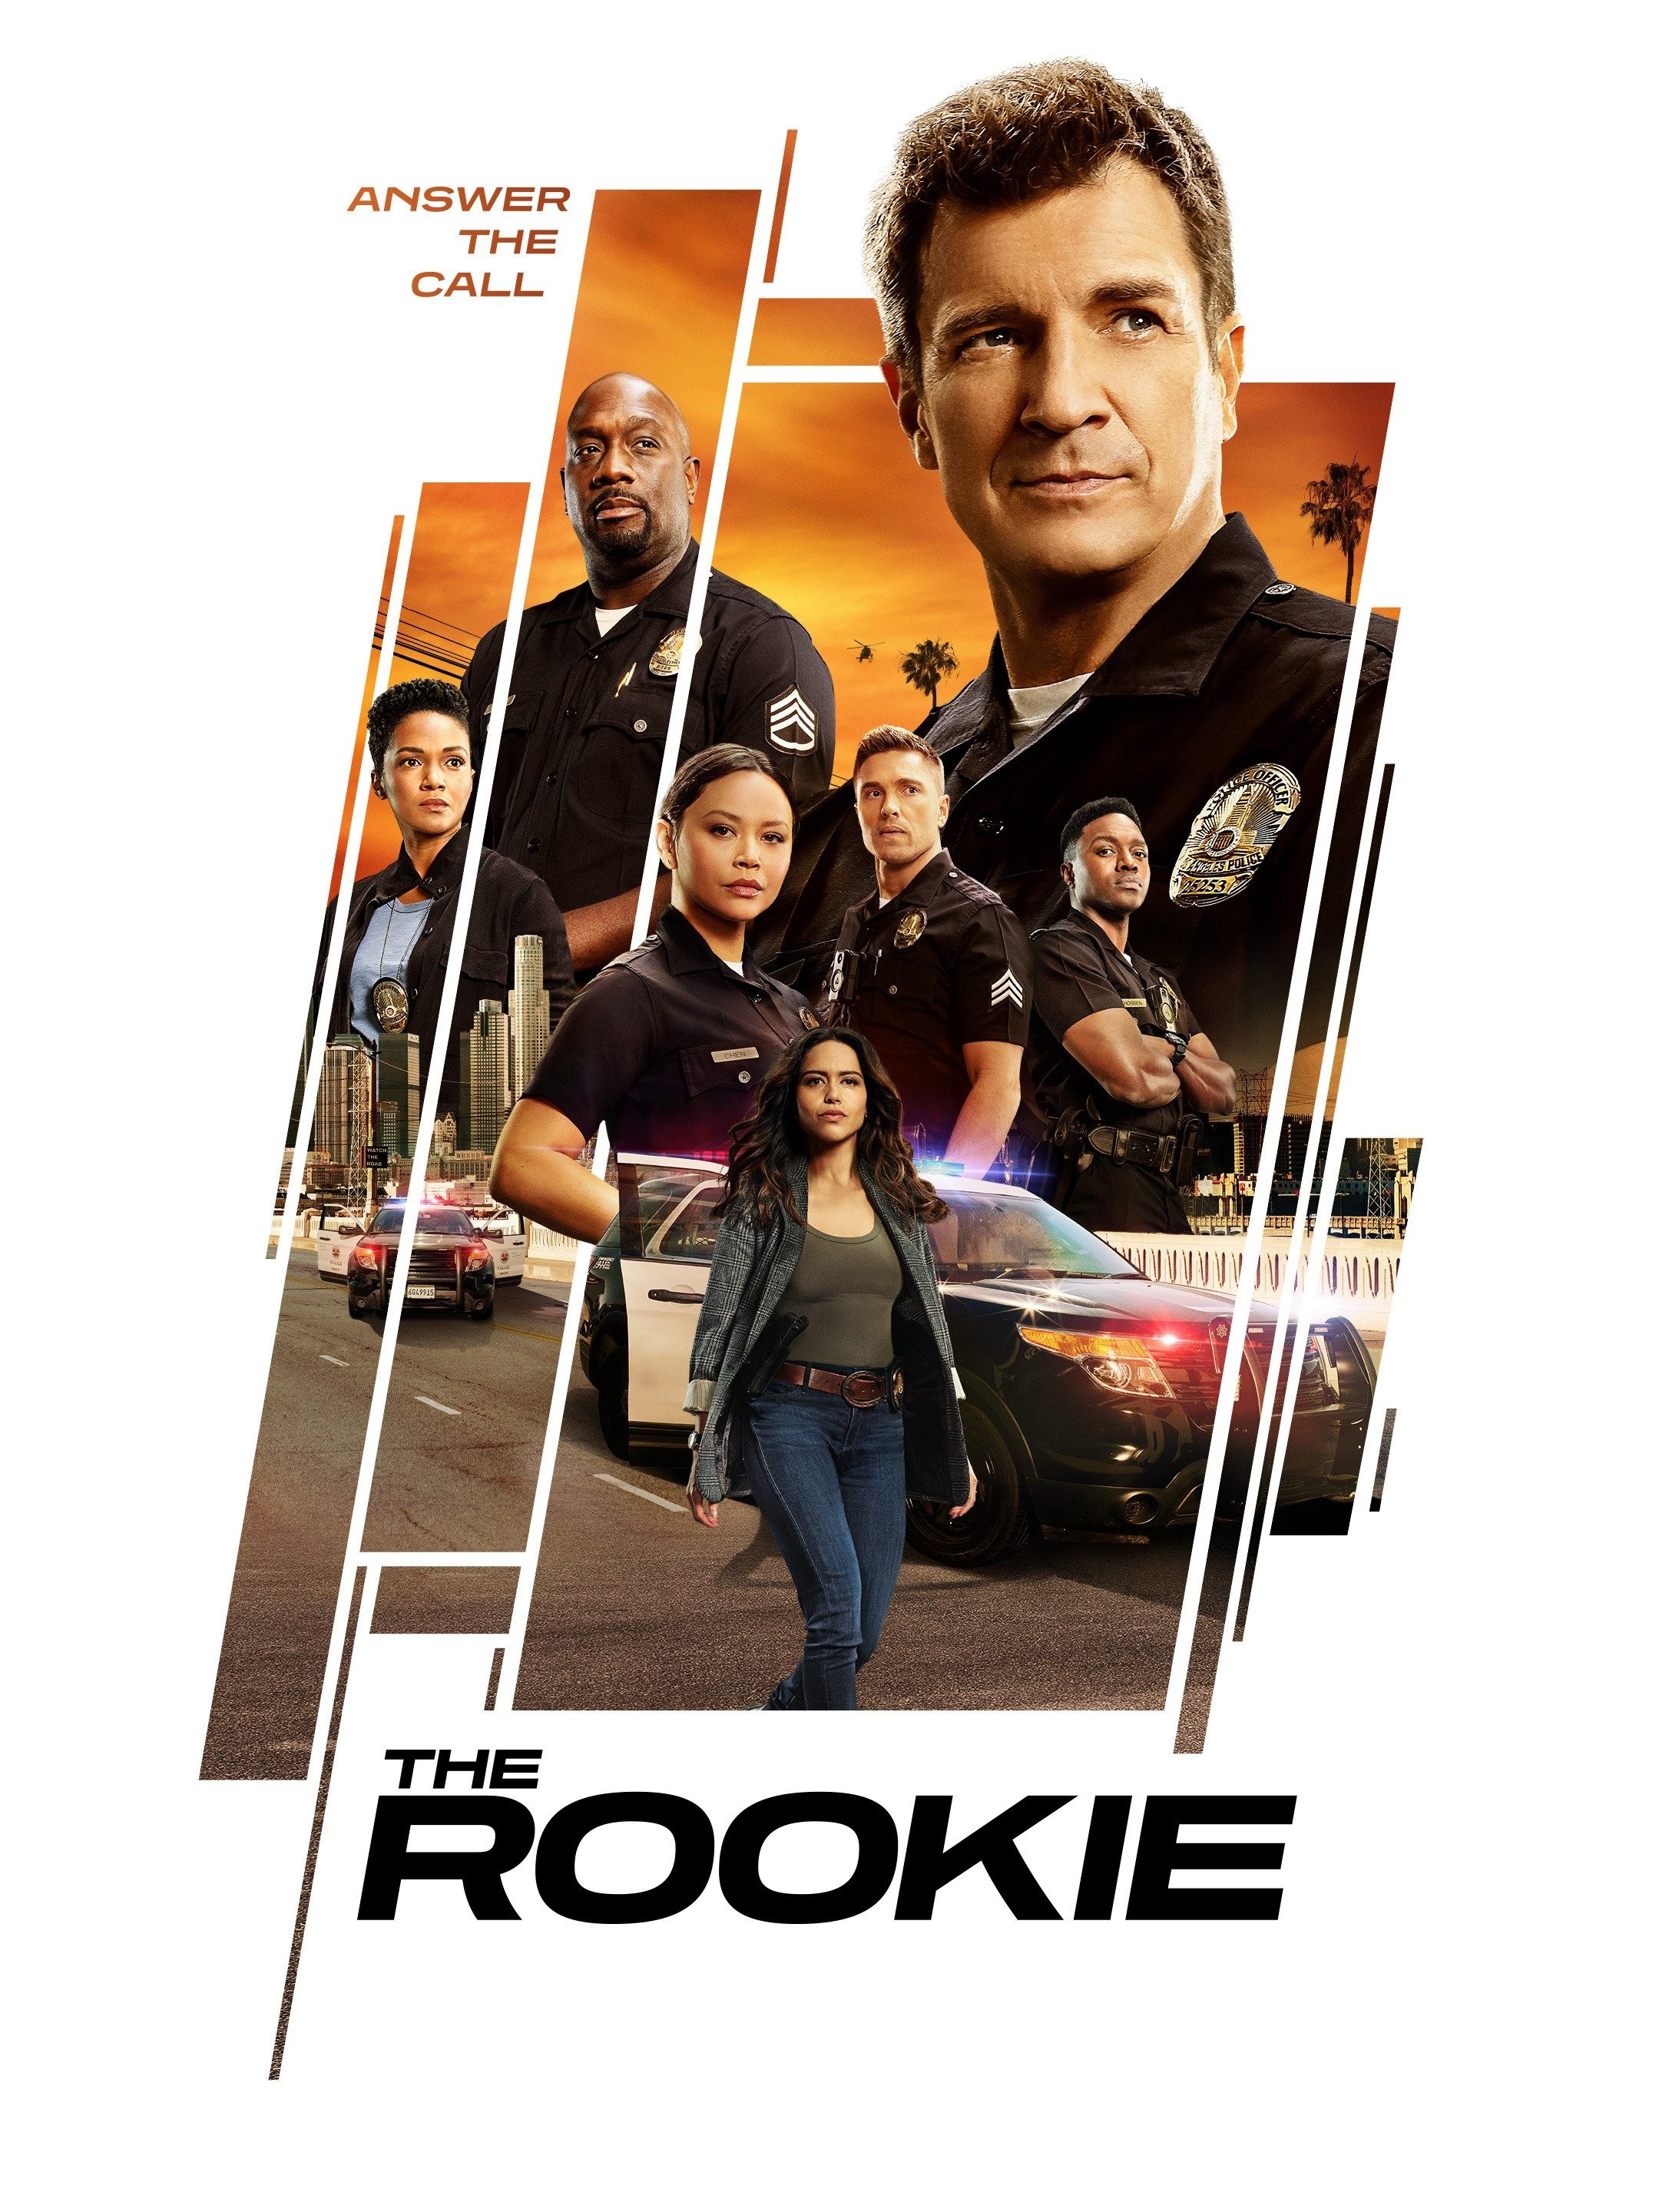 The Rookie Cast & Character Guide: Where You Know The Actors From?